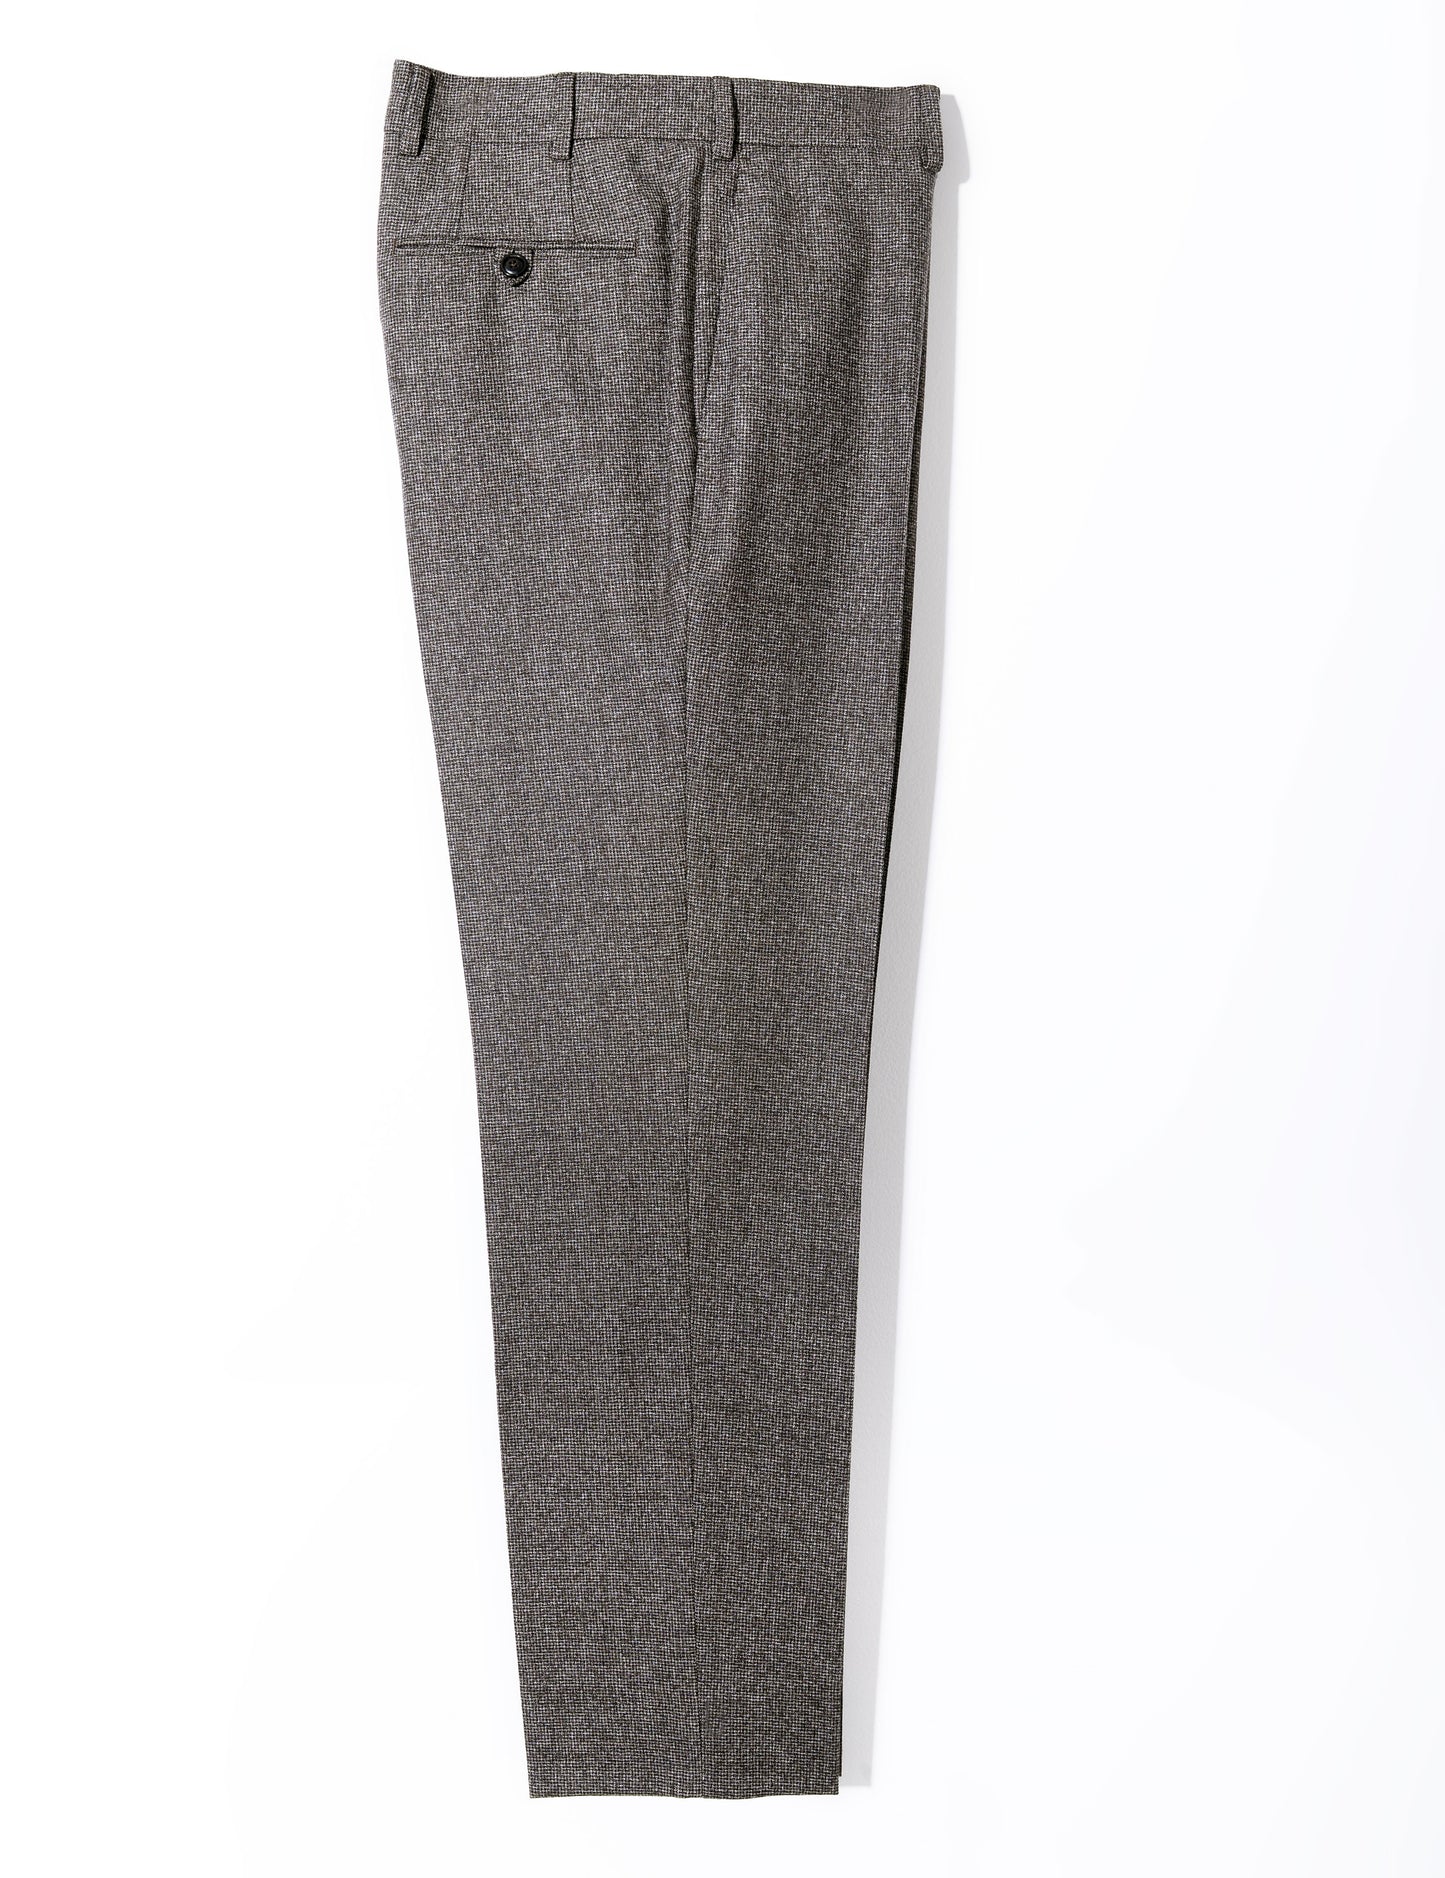 BKT50 Tailored Trousers in Super 130s Houndstooth Flannel - Smoke